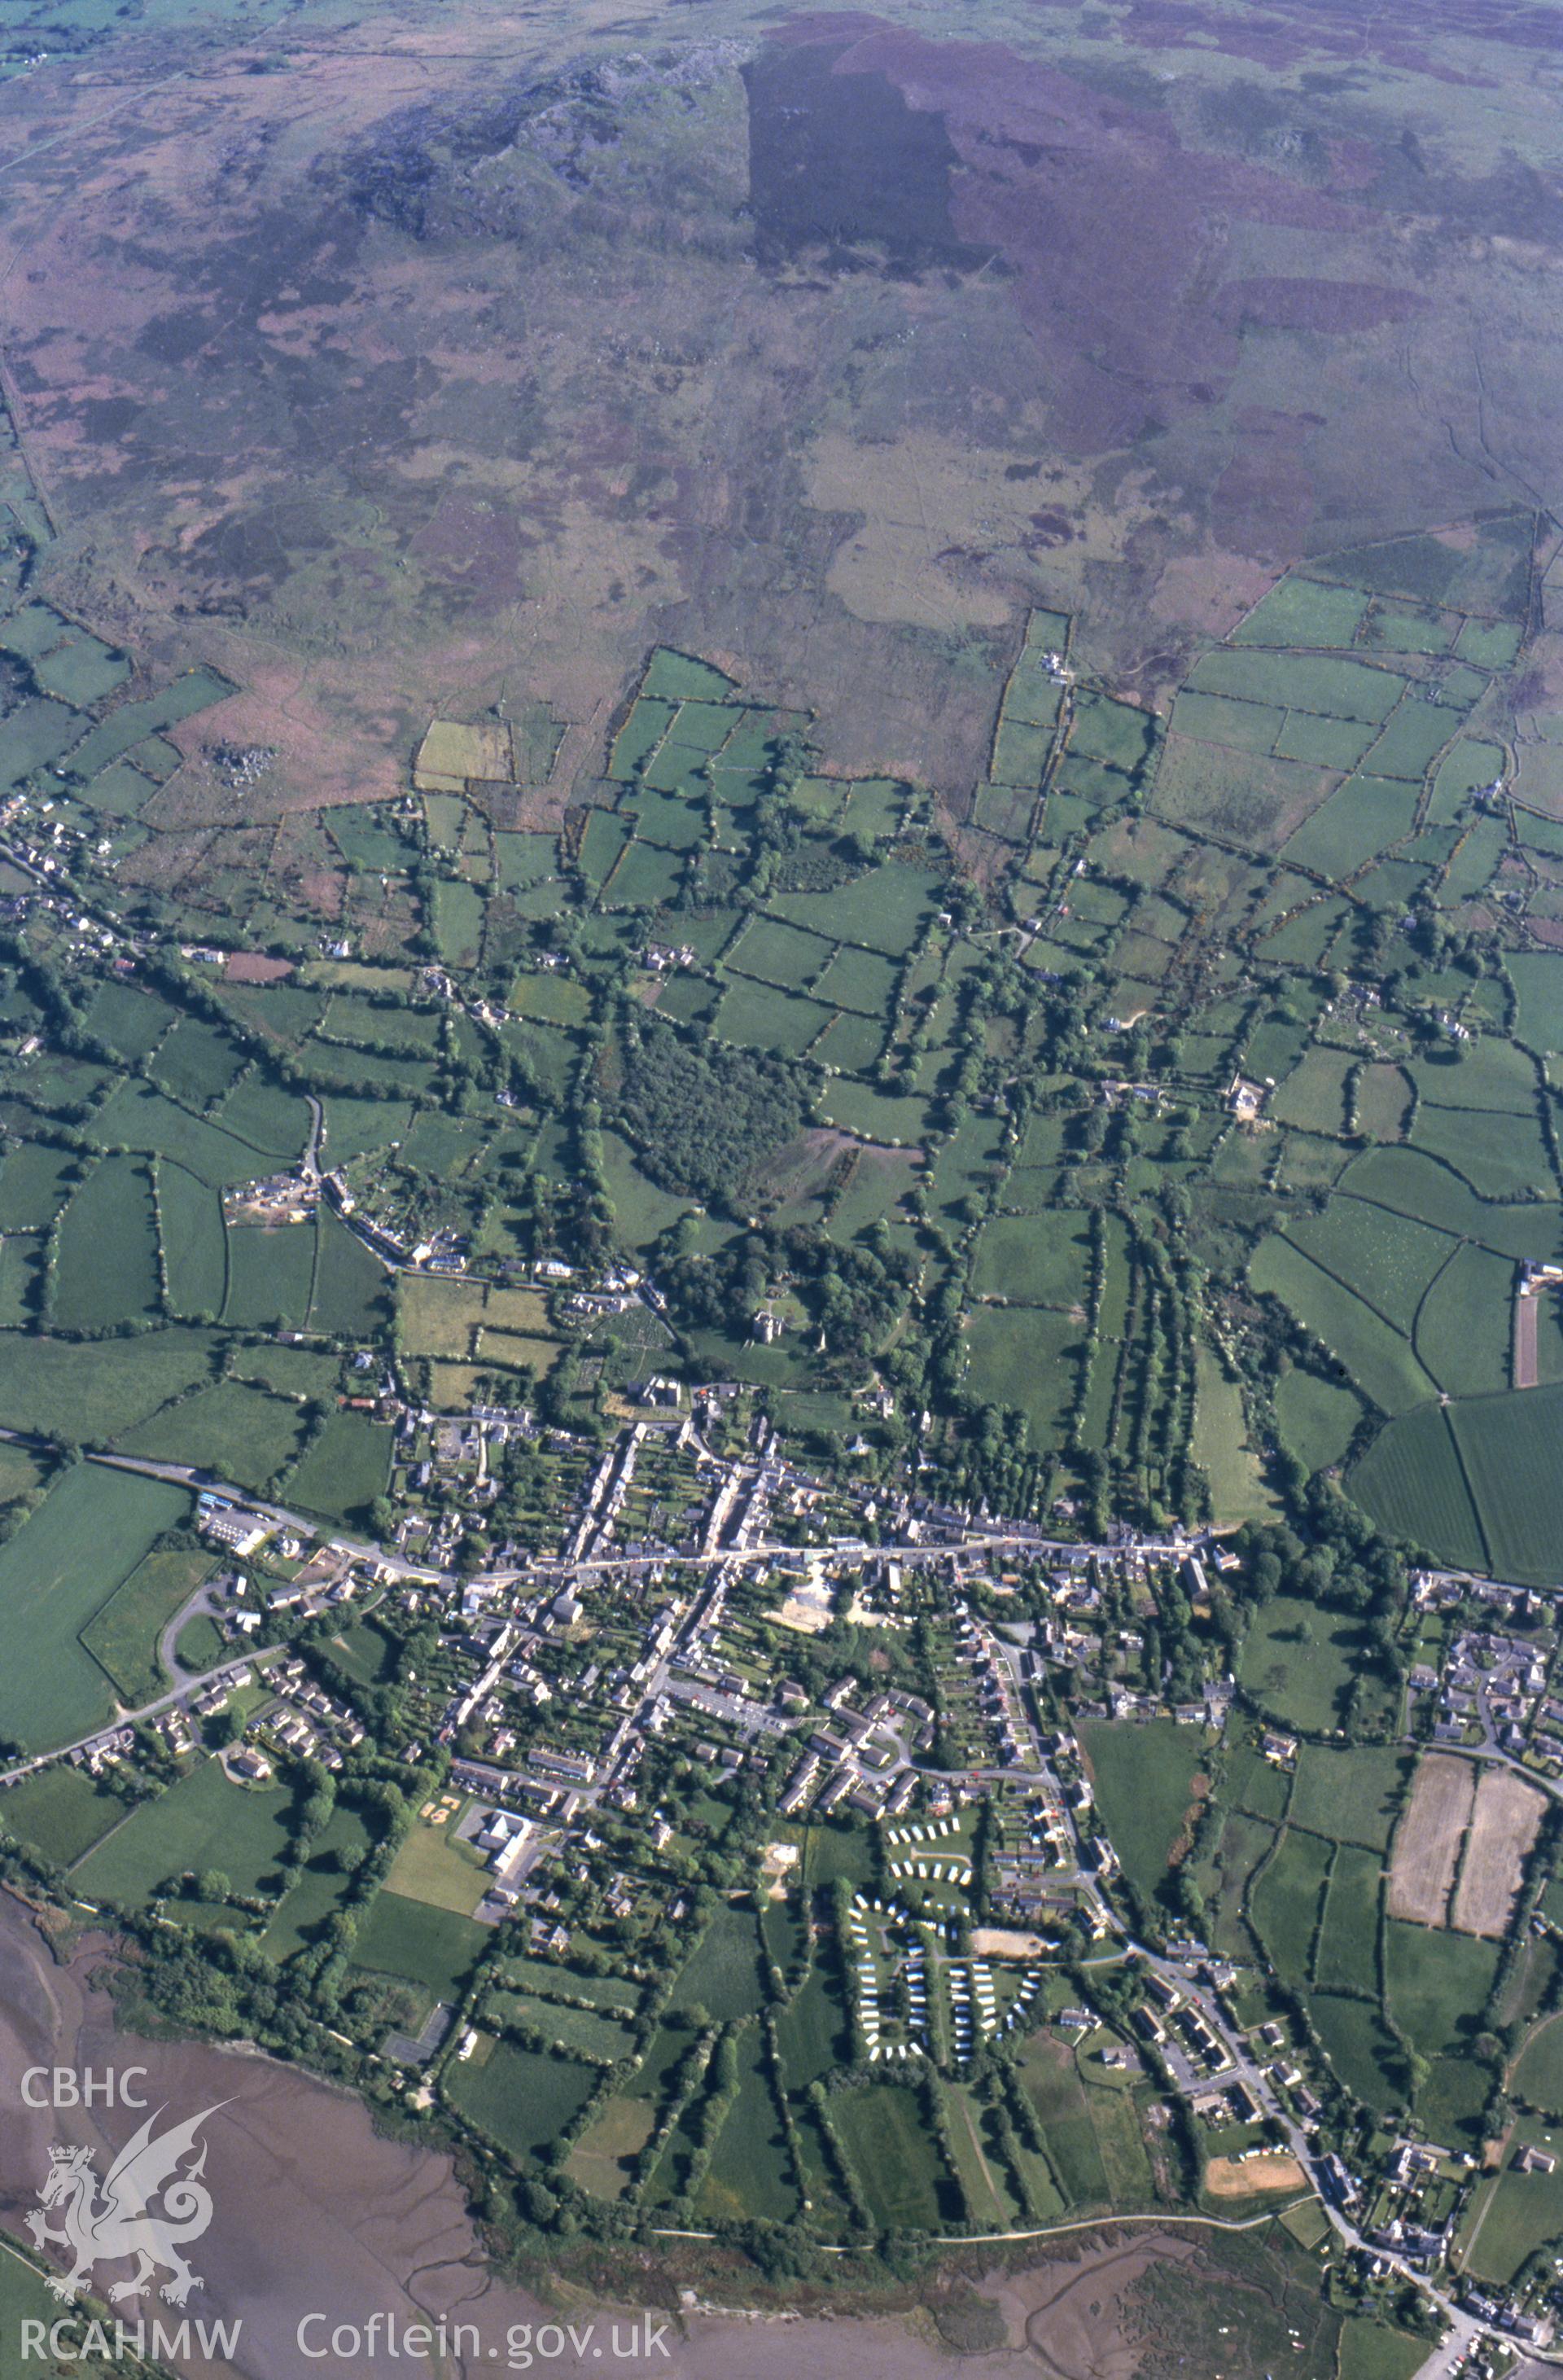 Slide of RCAHMW colour oblique aerial photograph of Newport, taken by T.G. Driver, 22/5/2000.